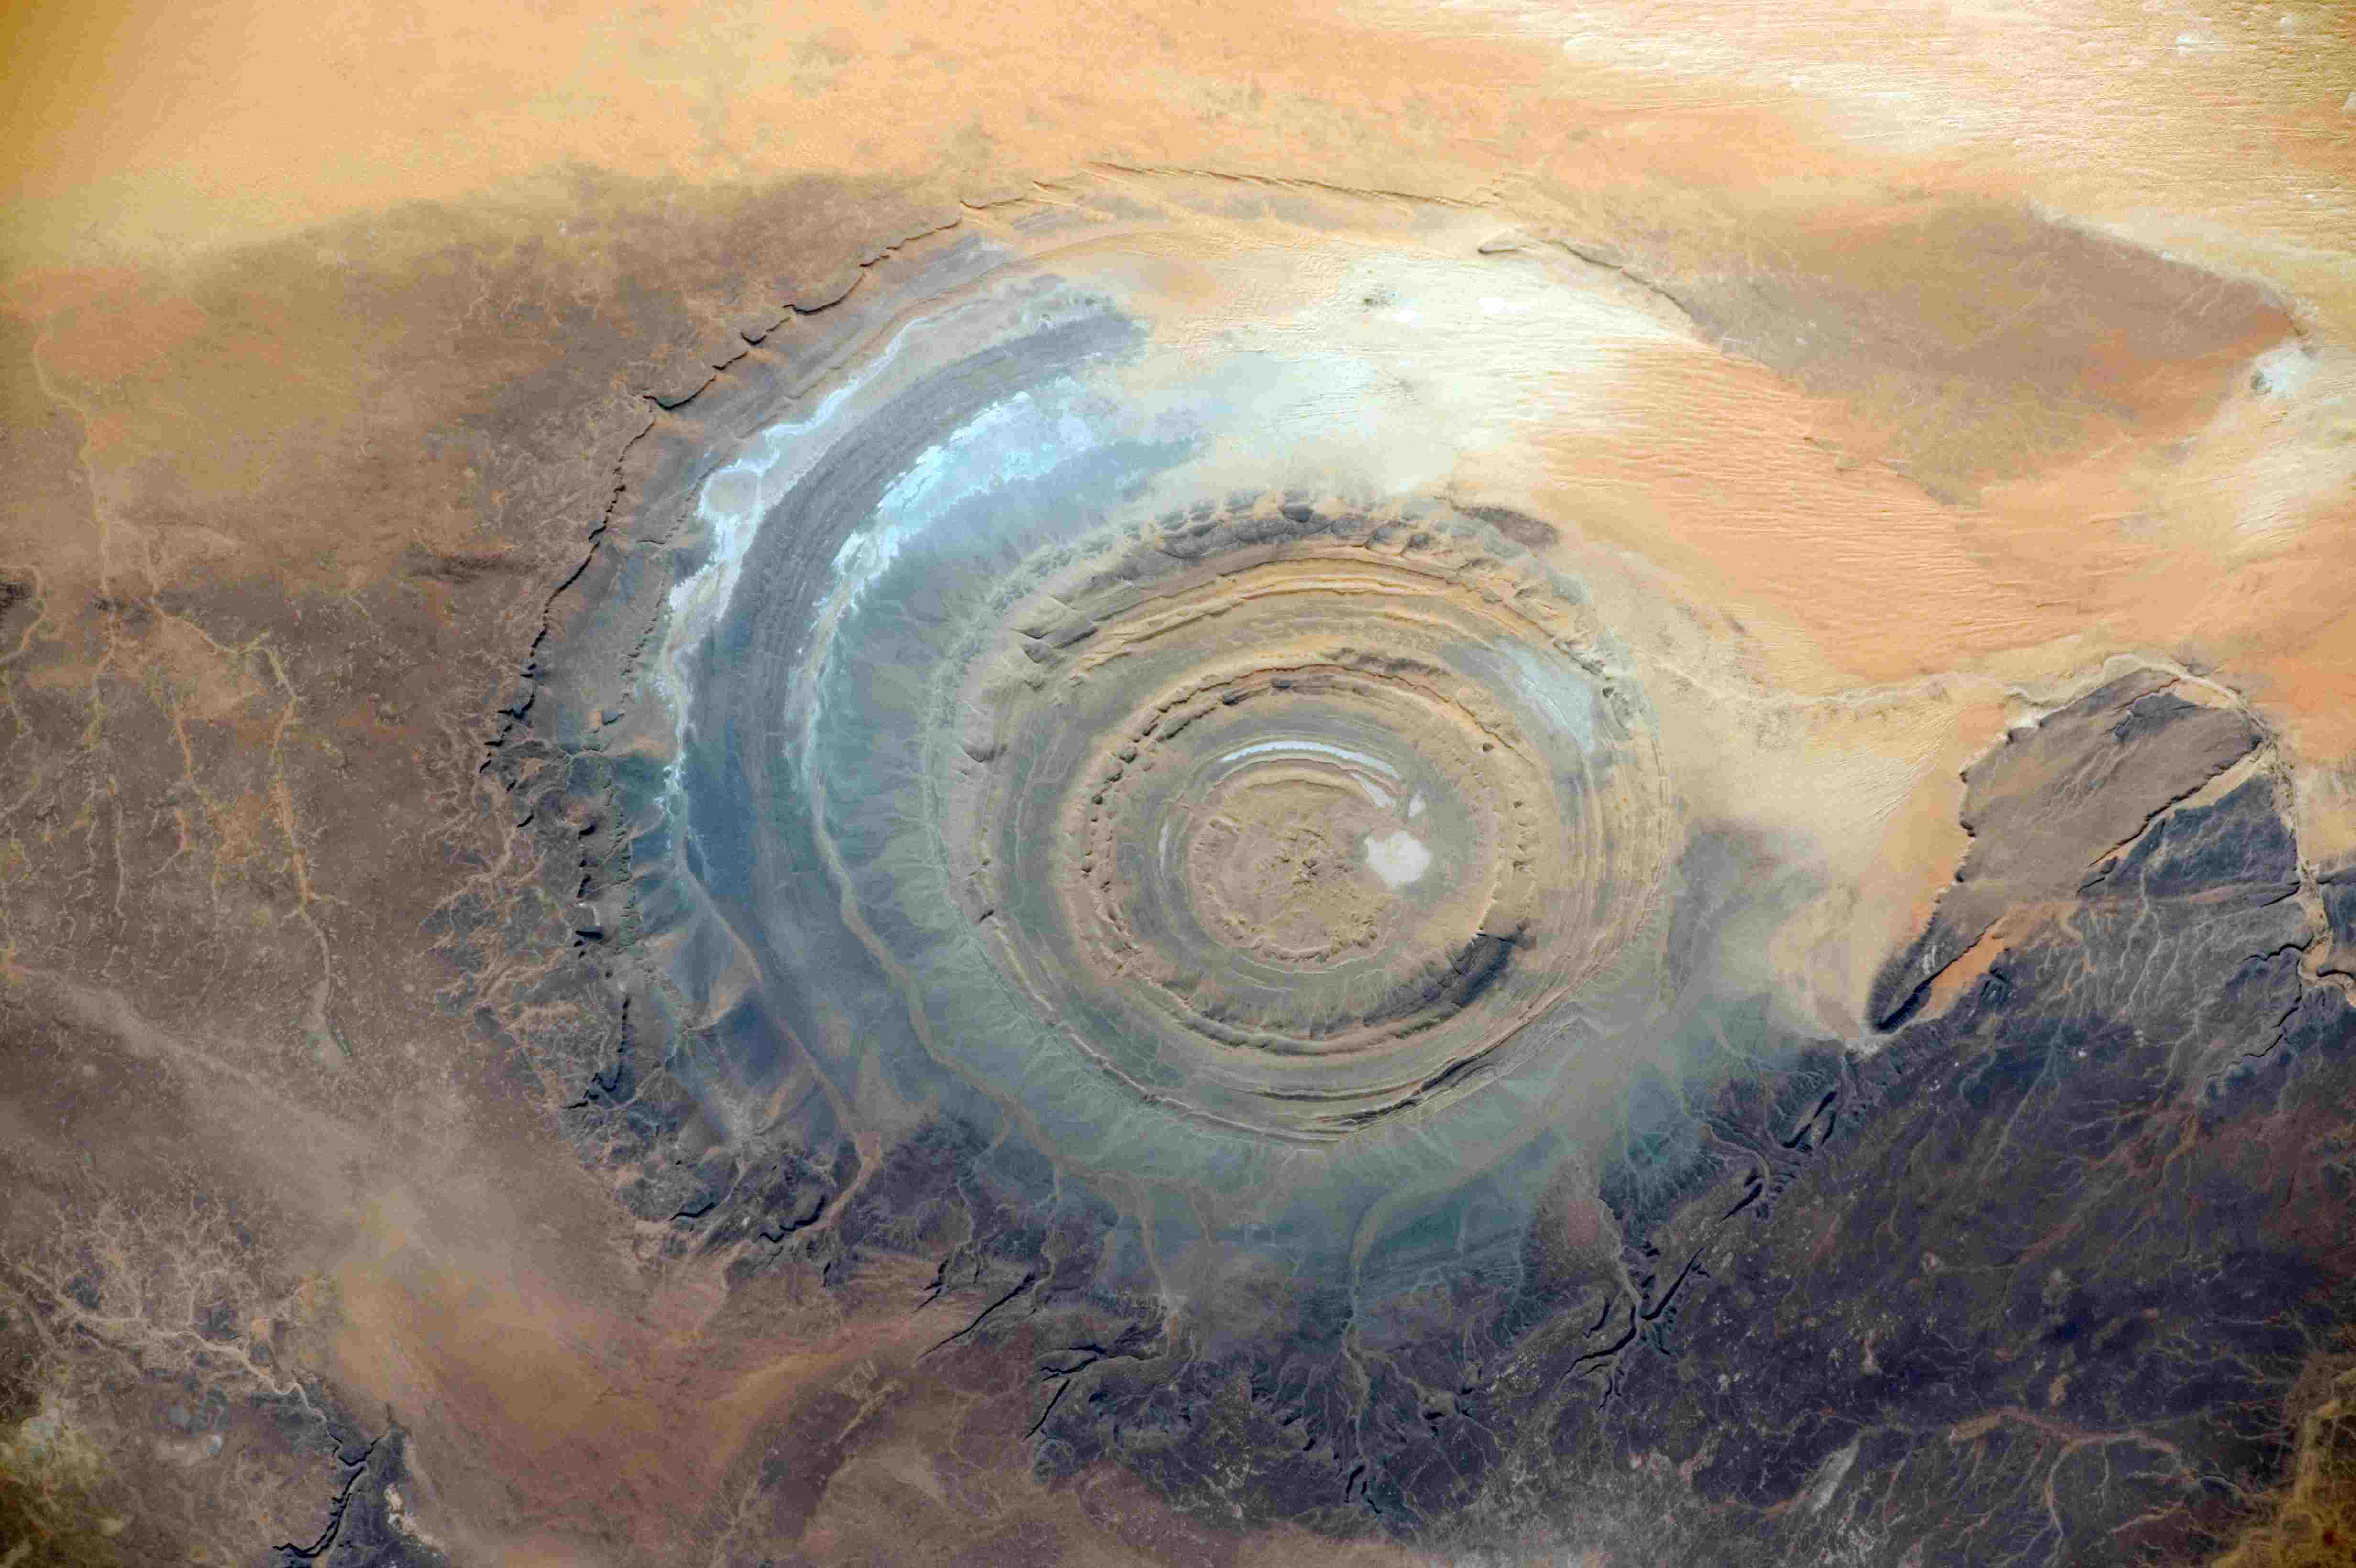 The Eye of the Sahara or Richat Structure photographed from the International Space Station.